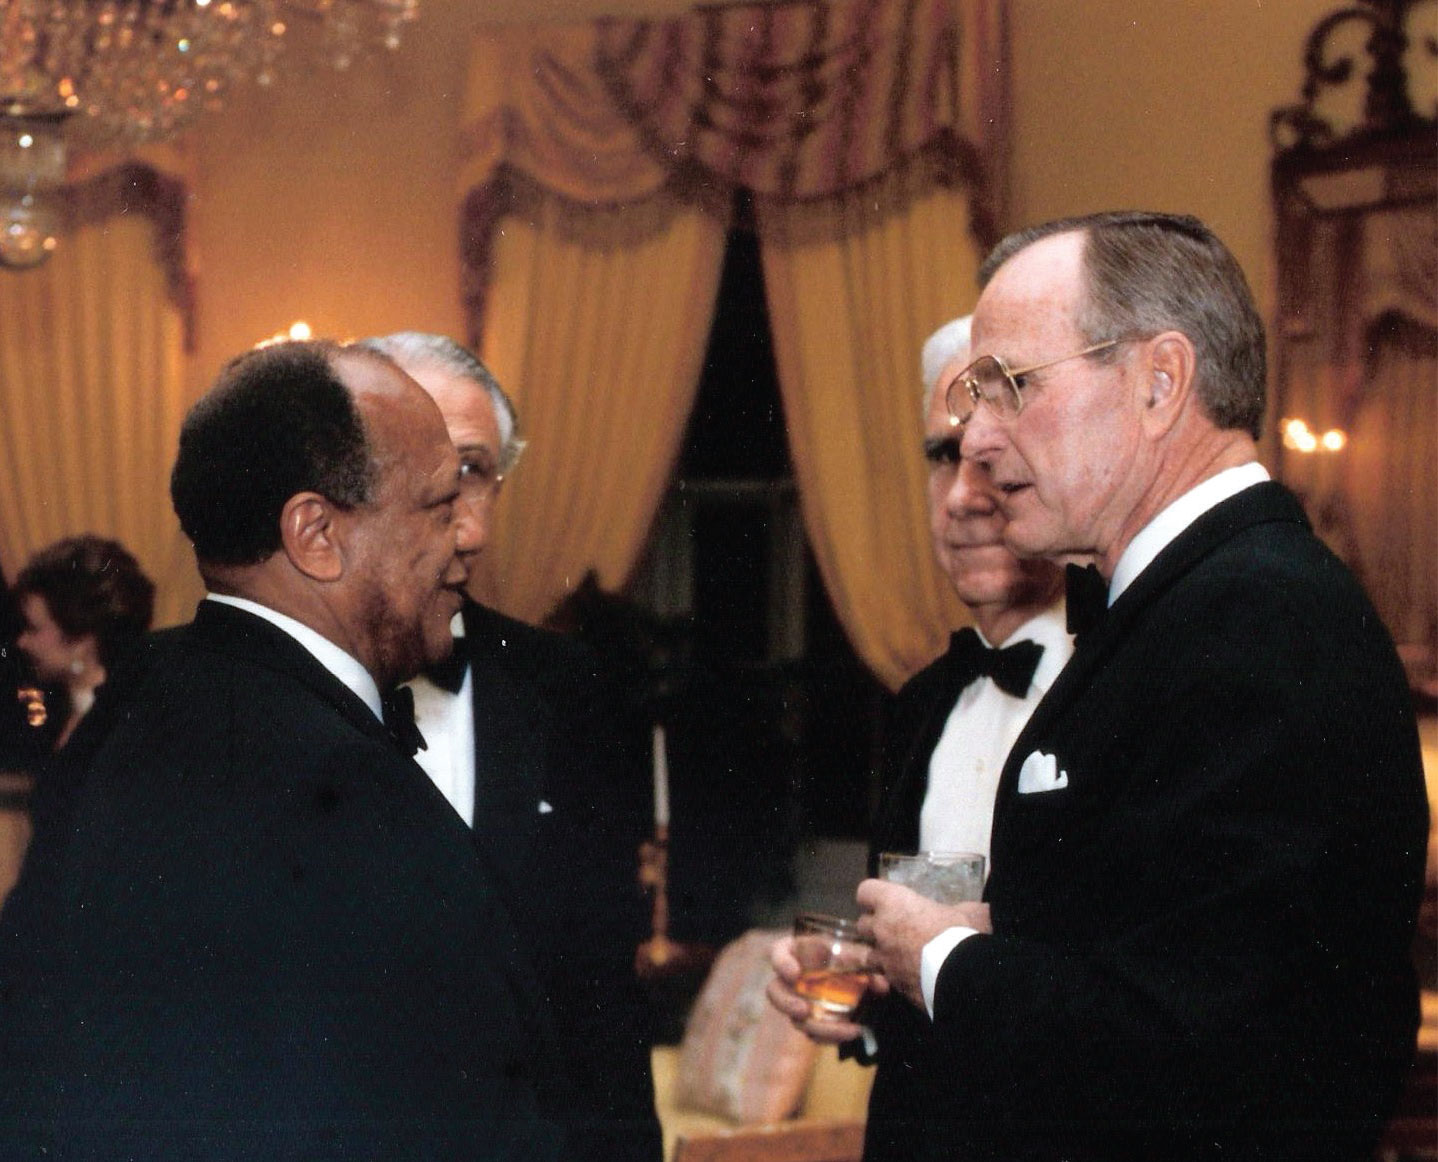 Ambassador Terence Todman attends a White House reception with President George H. W. Bush. (Photo courtesy James Dandridge II)